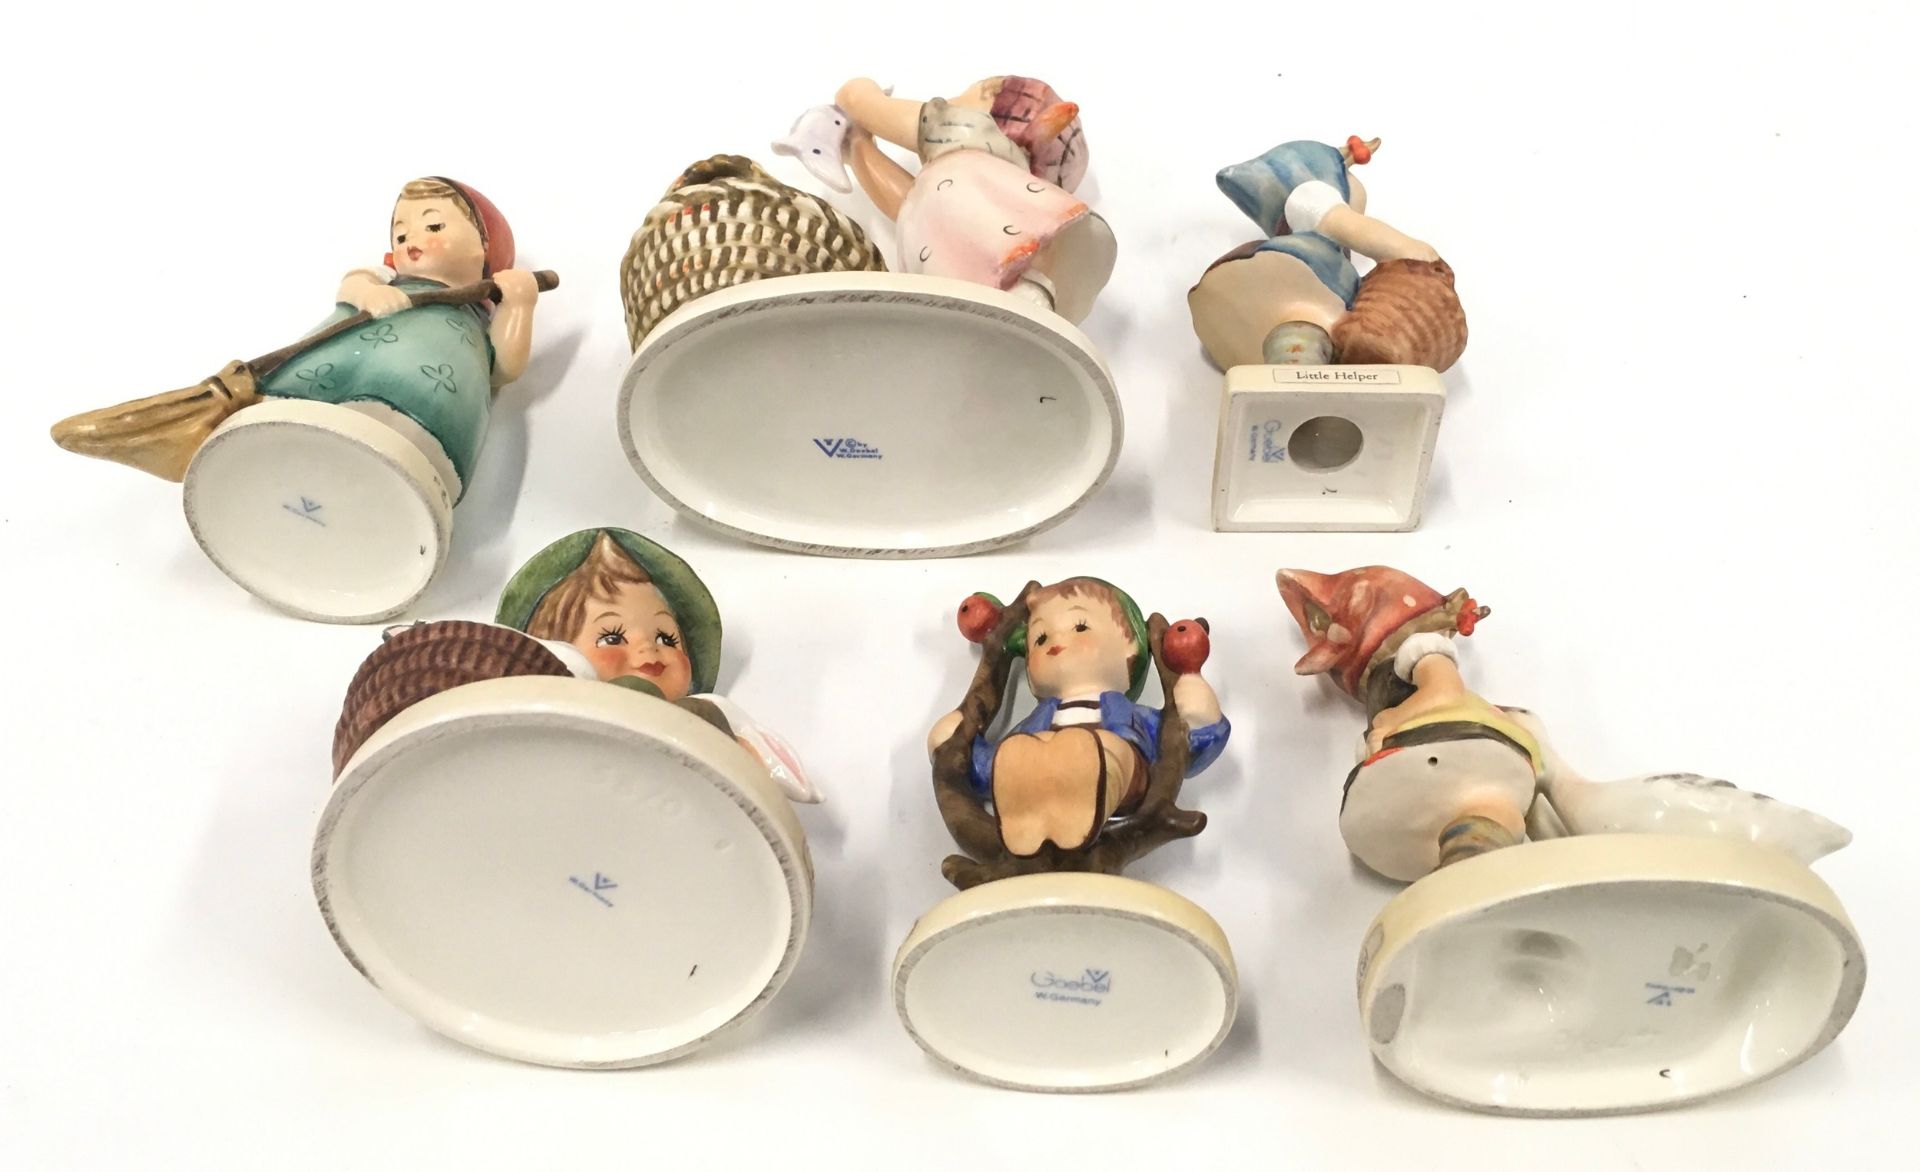 Goebel/Hummel collection of figurines to include "Little Helper" and "Goose Girl" (6). - Image 5 of 5